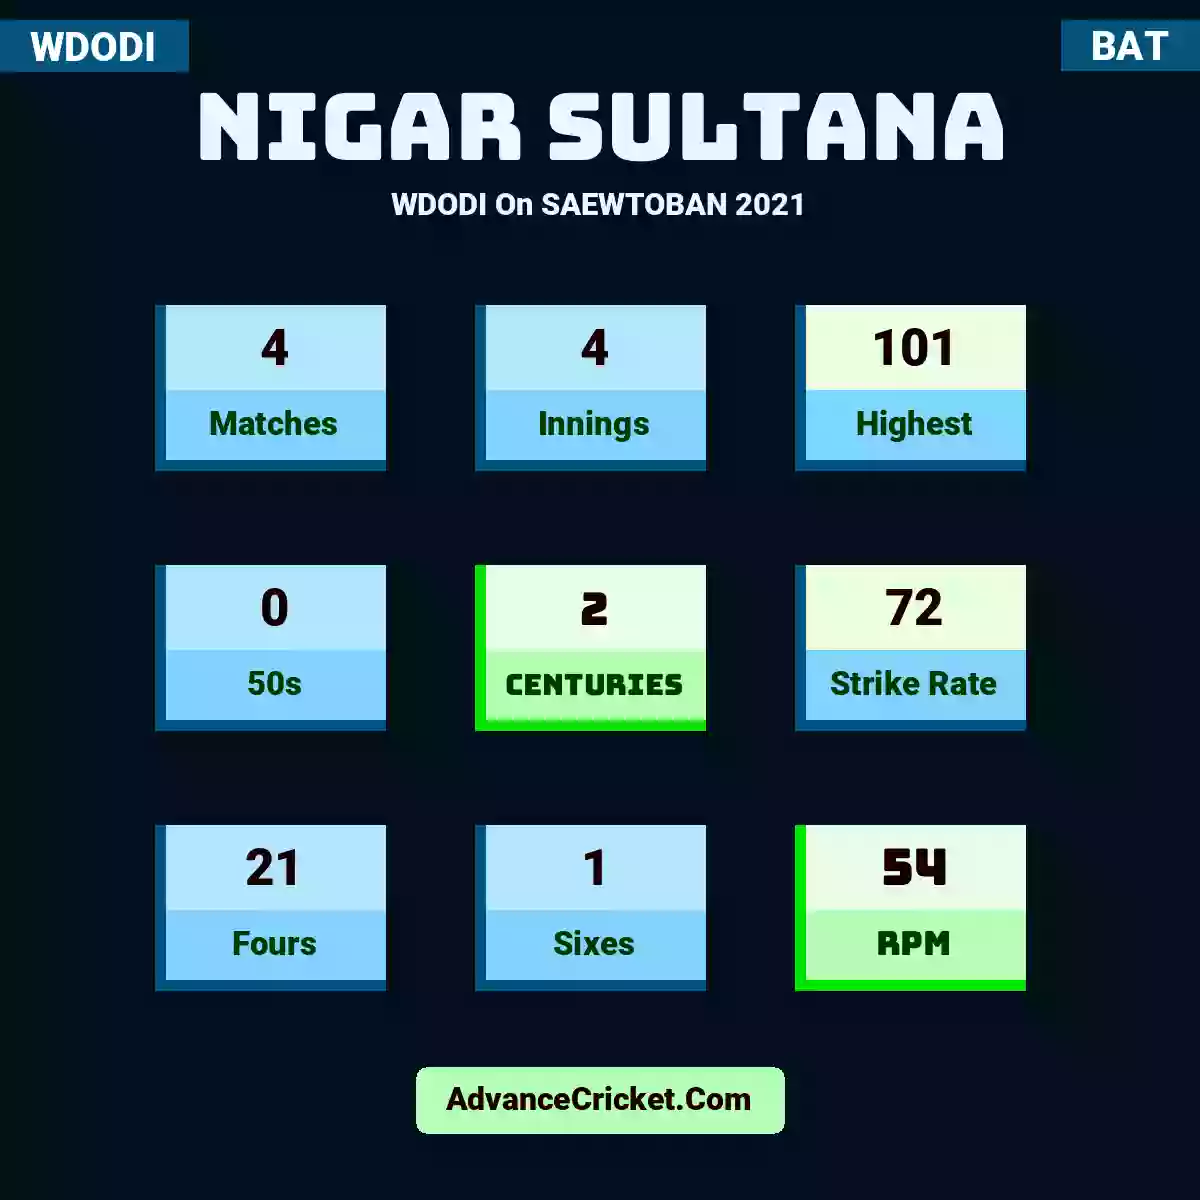 Nigar Sultana WDODI  On SAEWTOBAN 2021, Nigar Sultana played 4 matches, scored 101 runs as highest, 0 half-centuries, and 2 centuries, with a strike rate of 72. N.Sultana hit 21 fours and 1 sixes, with an RPM of 54.